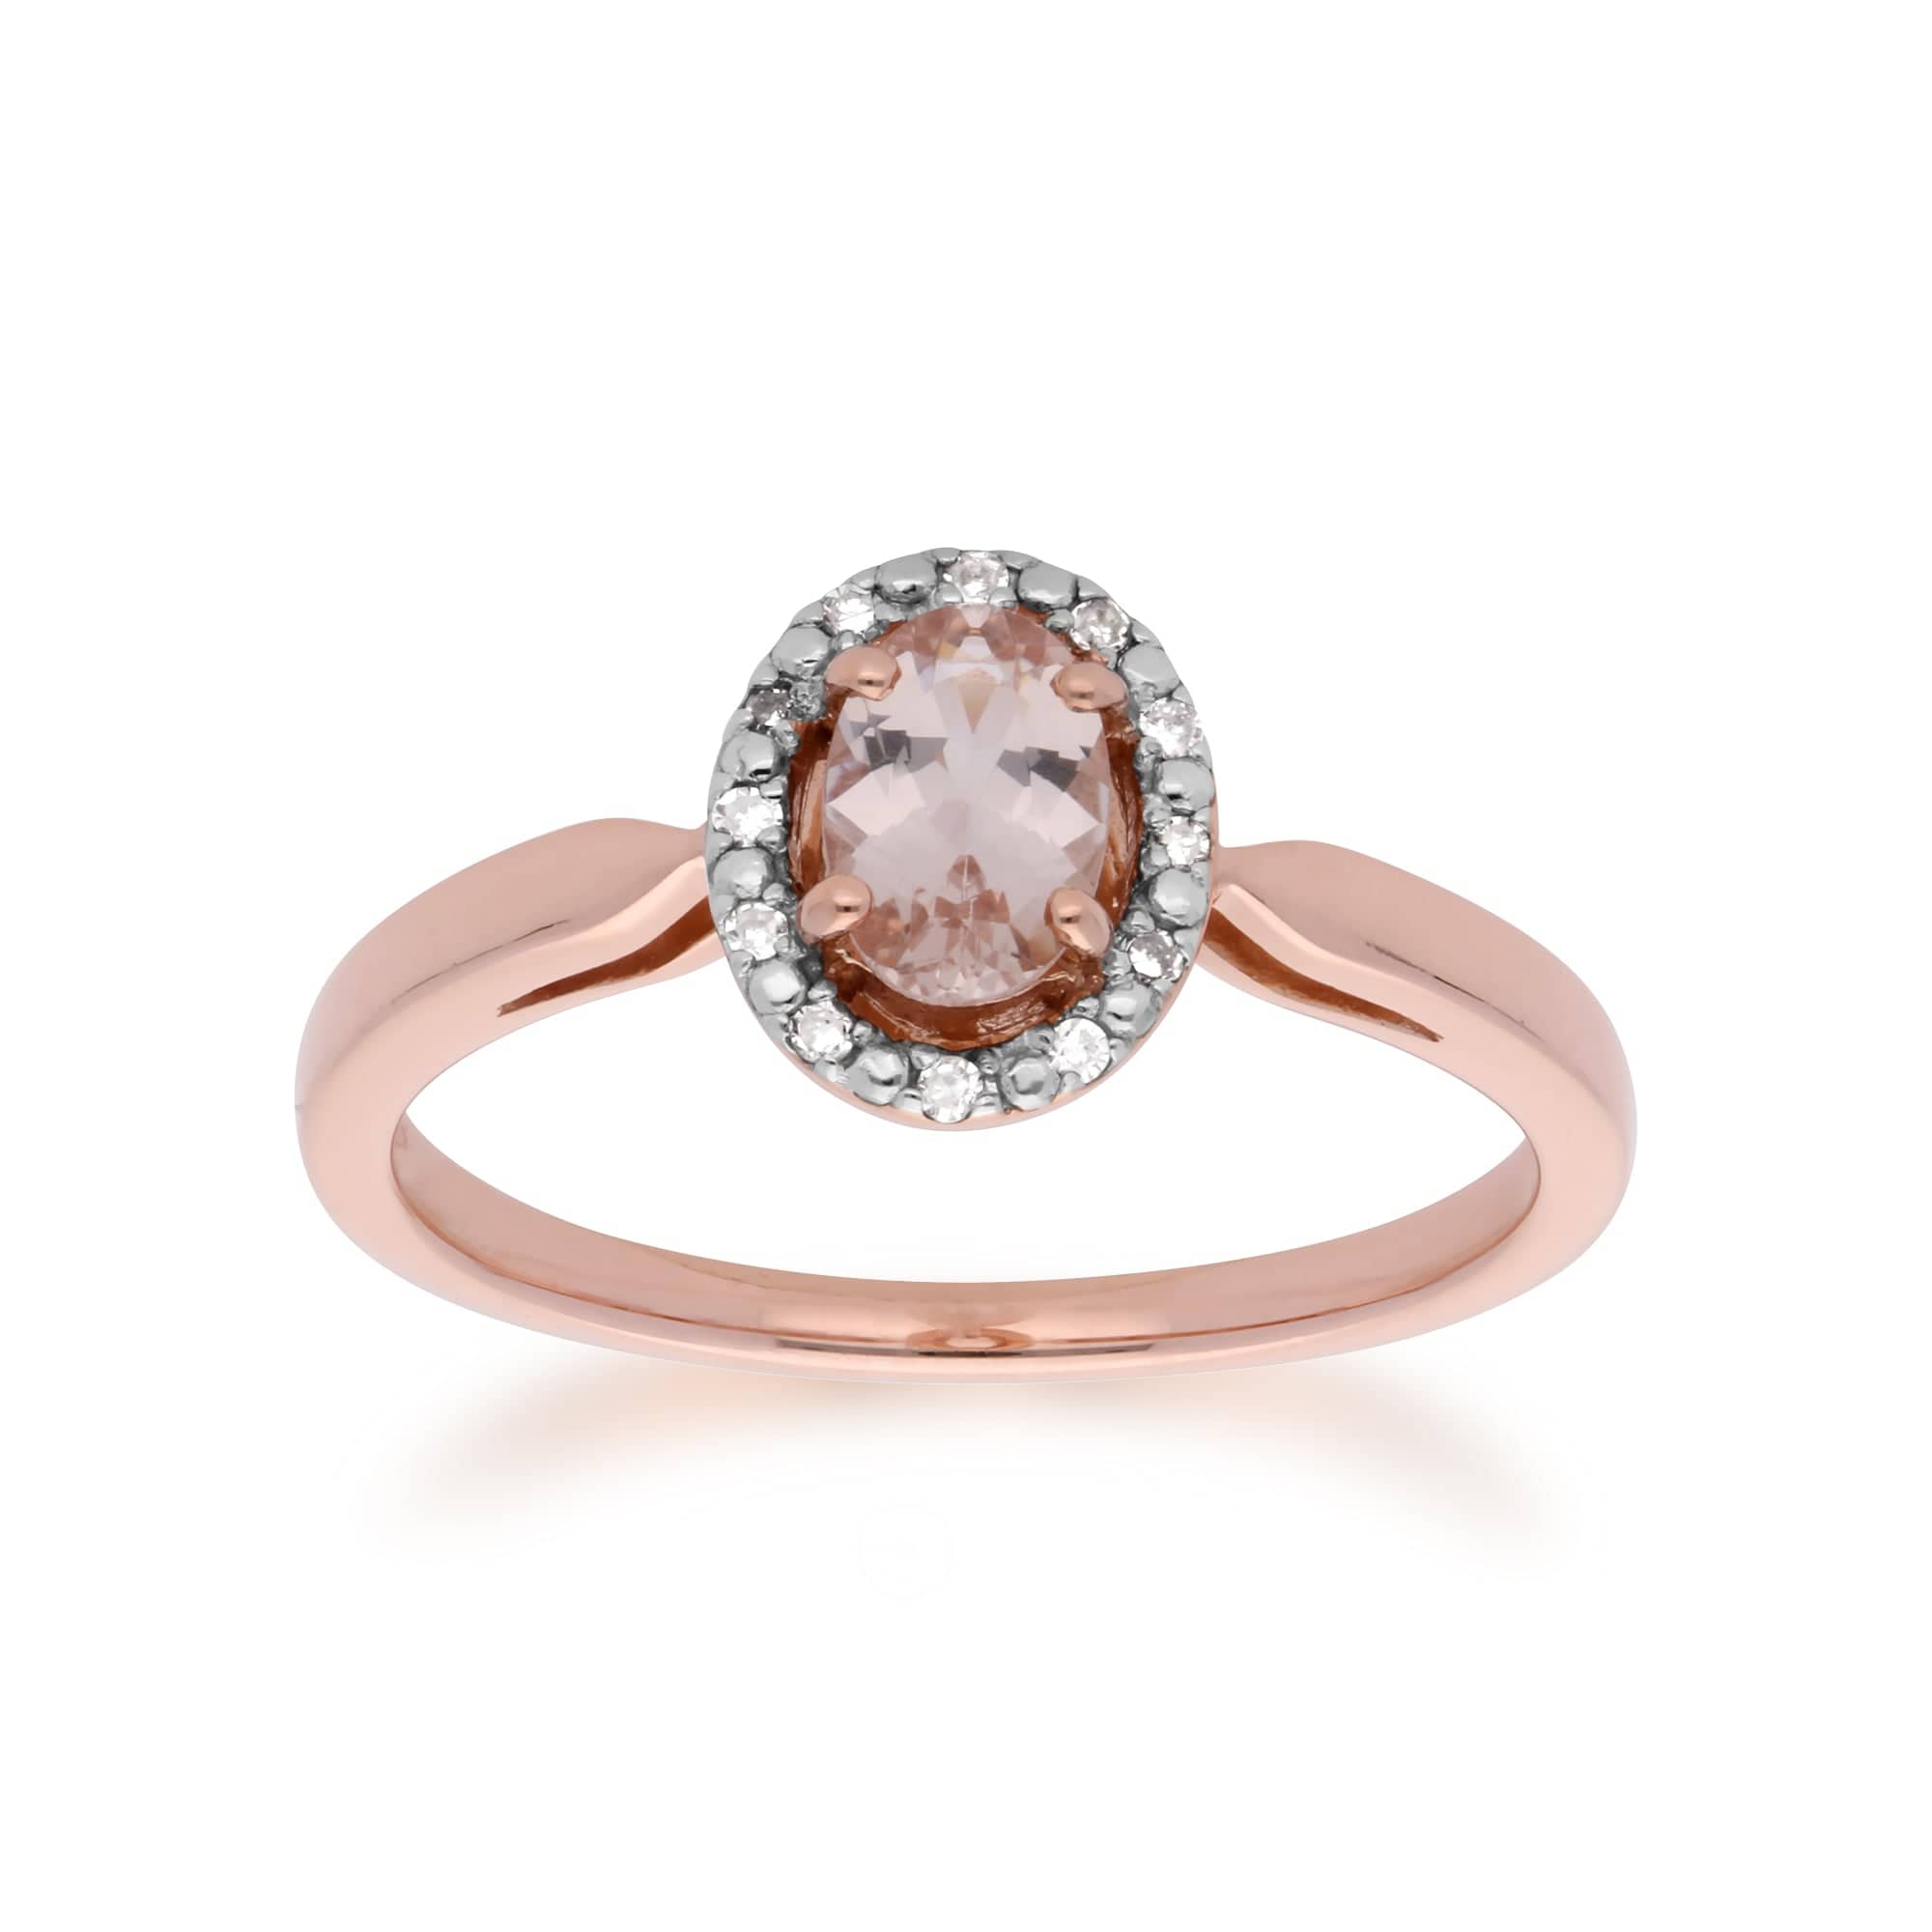 135E1451019-135R1589019 Classic Oval Morganite & Diamond Halo Stud Earrings & Solitaire Ring Set in 9ct Rose Gold 3